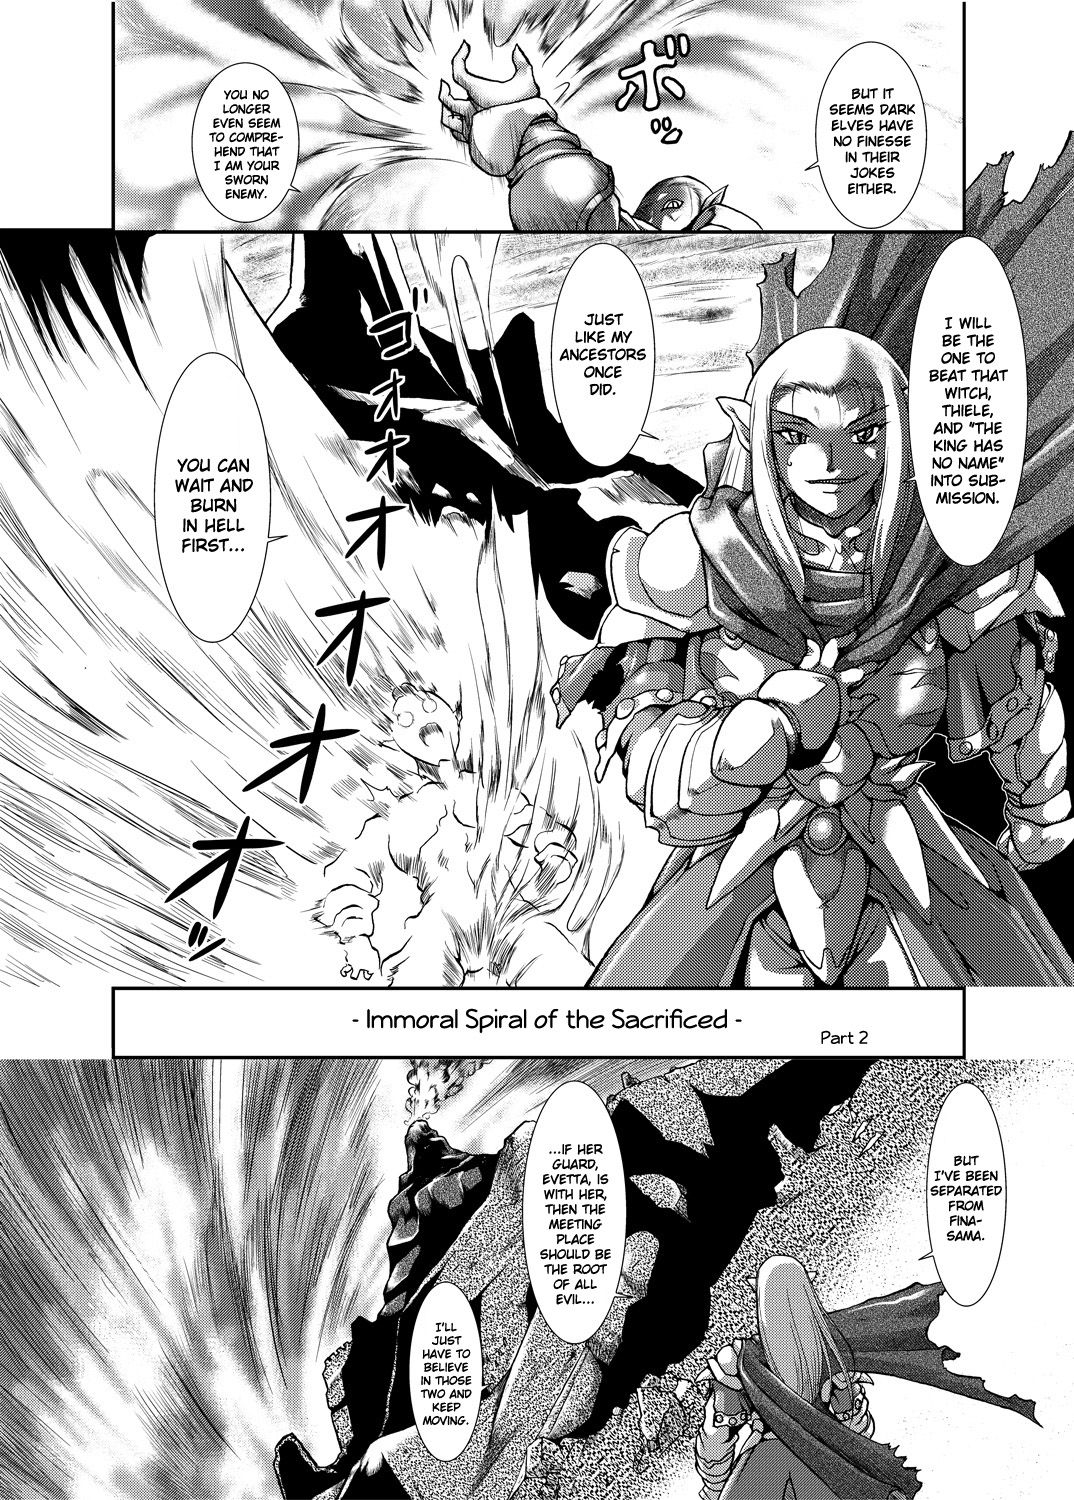 [Furuya (TAKE)] Spiral of Conflict 2 (Chaos Breaker) [English] [Cheesey] 4